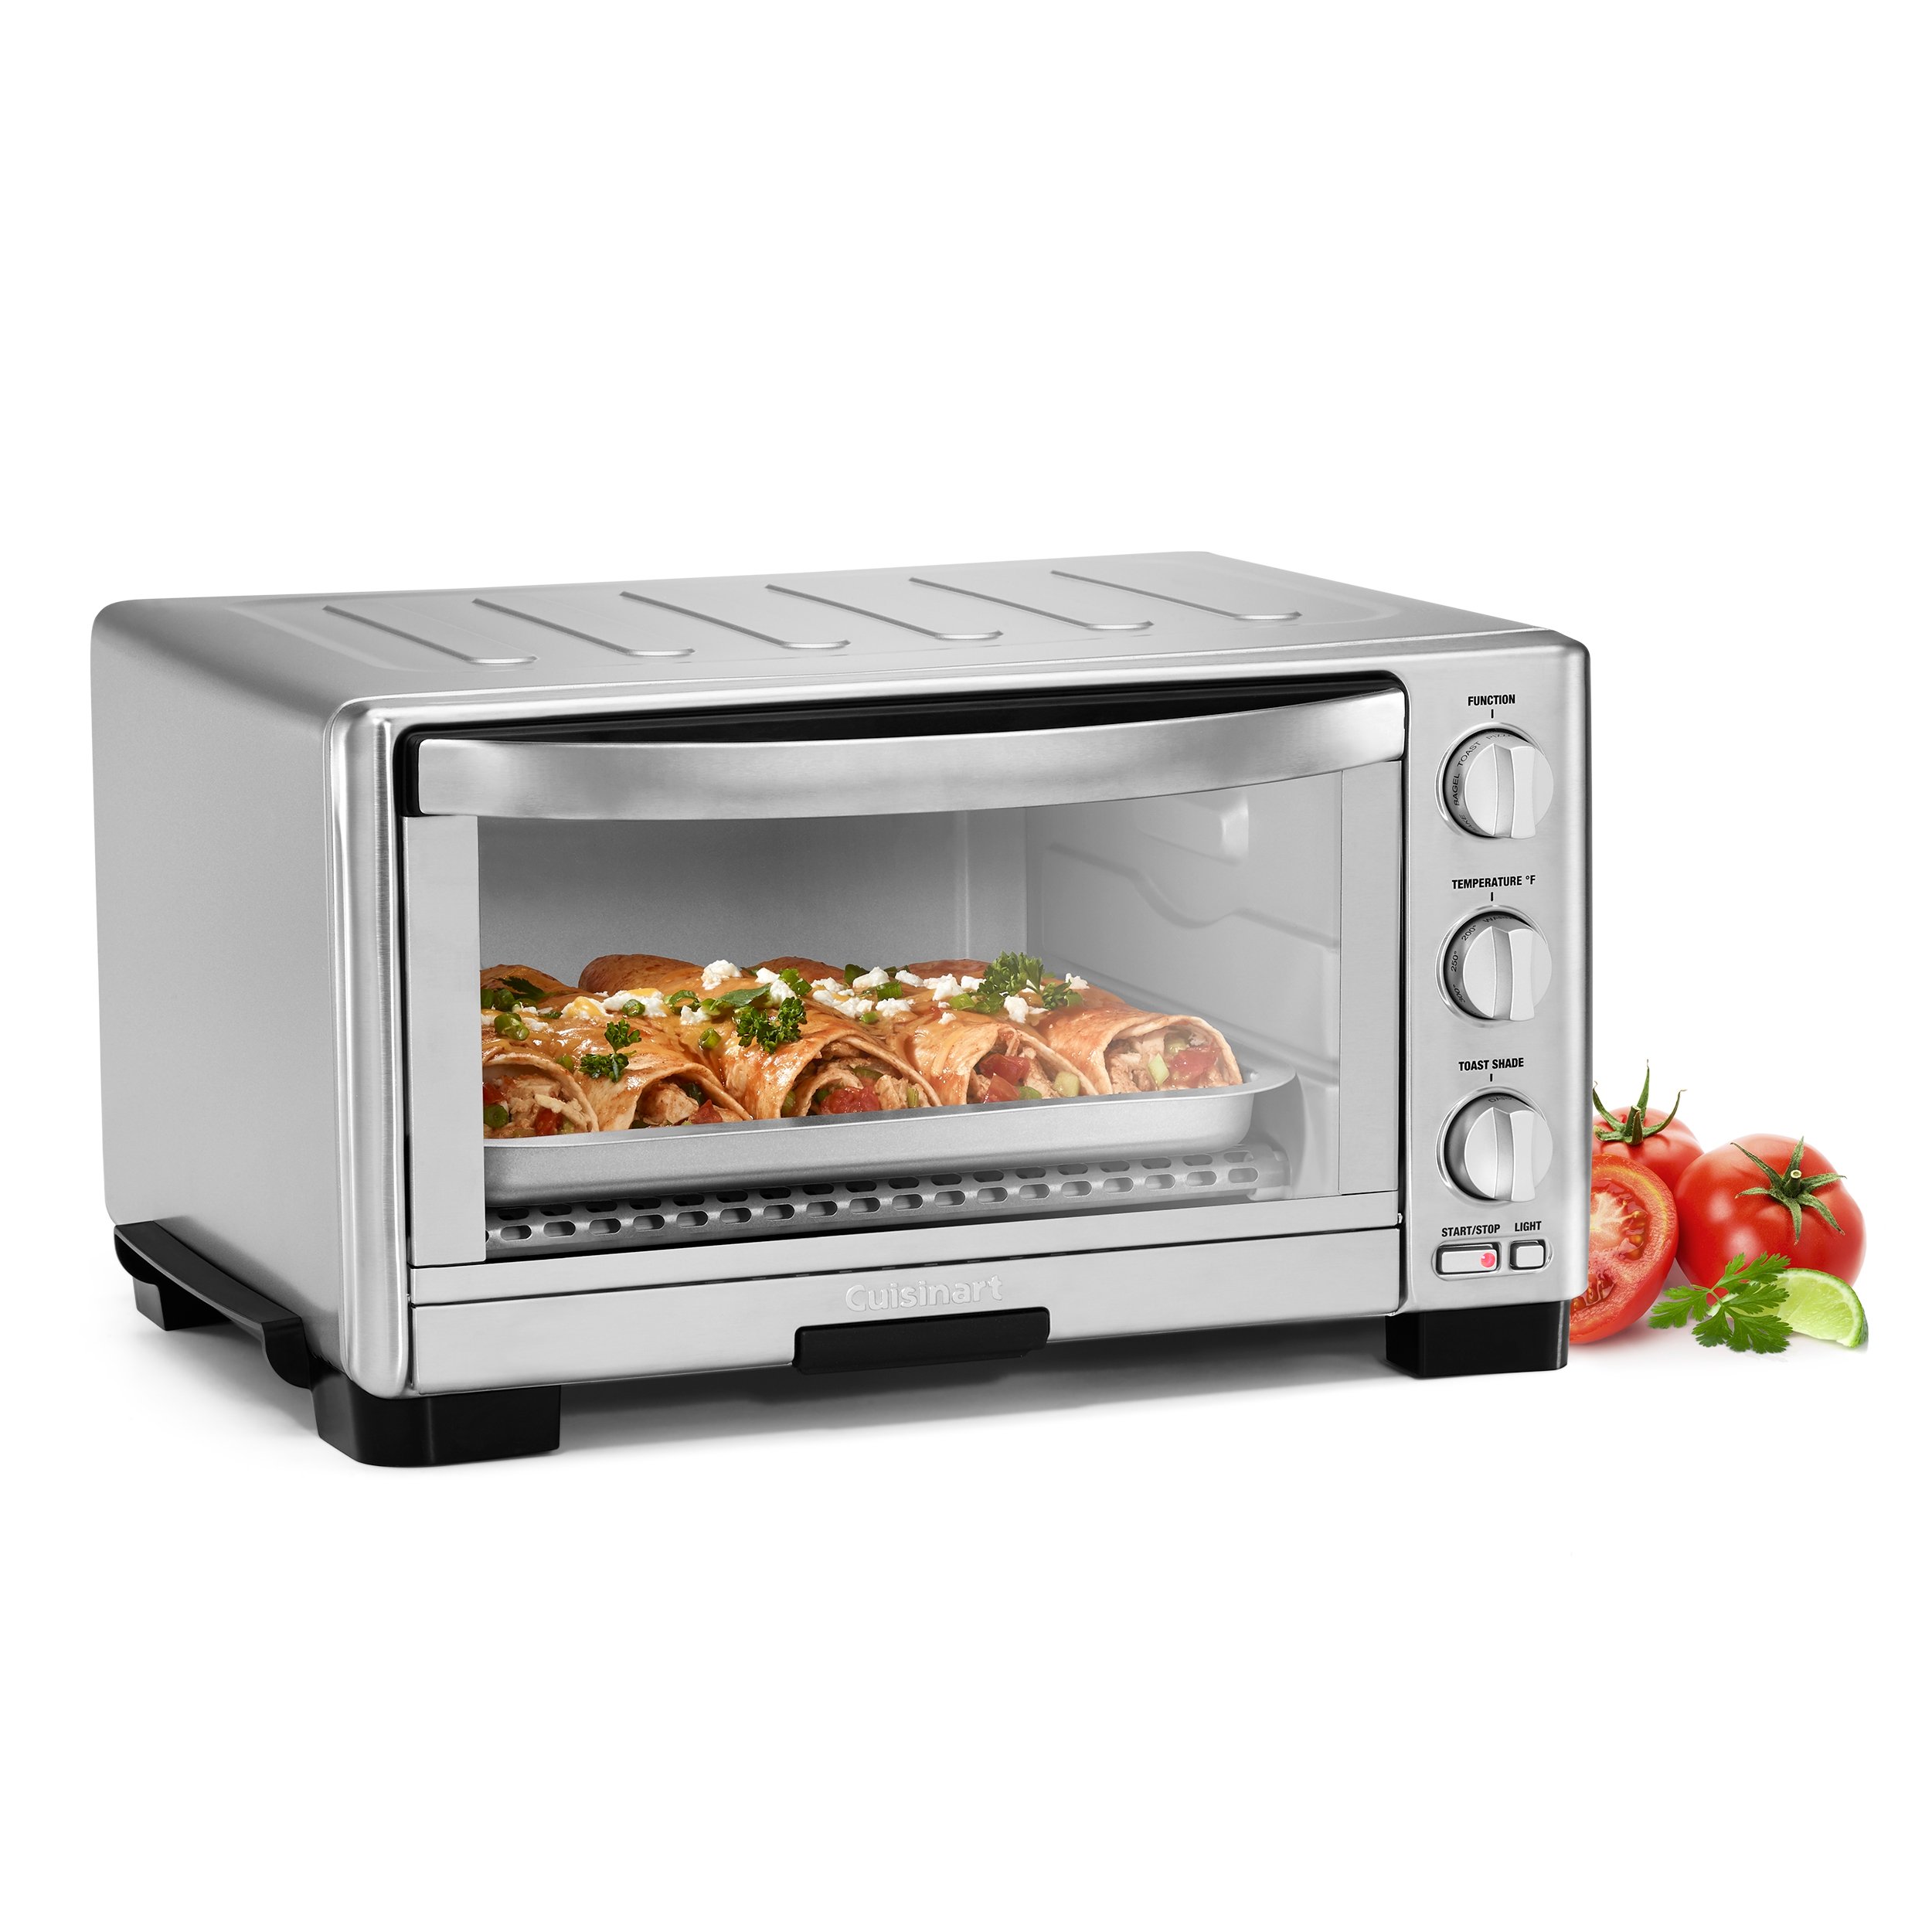 Cuisinart Chef's Classic Non-Stick Toaster Oven Broiler Pan with